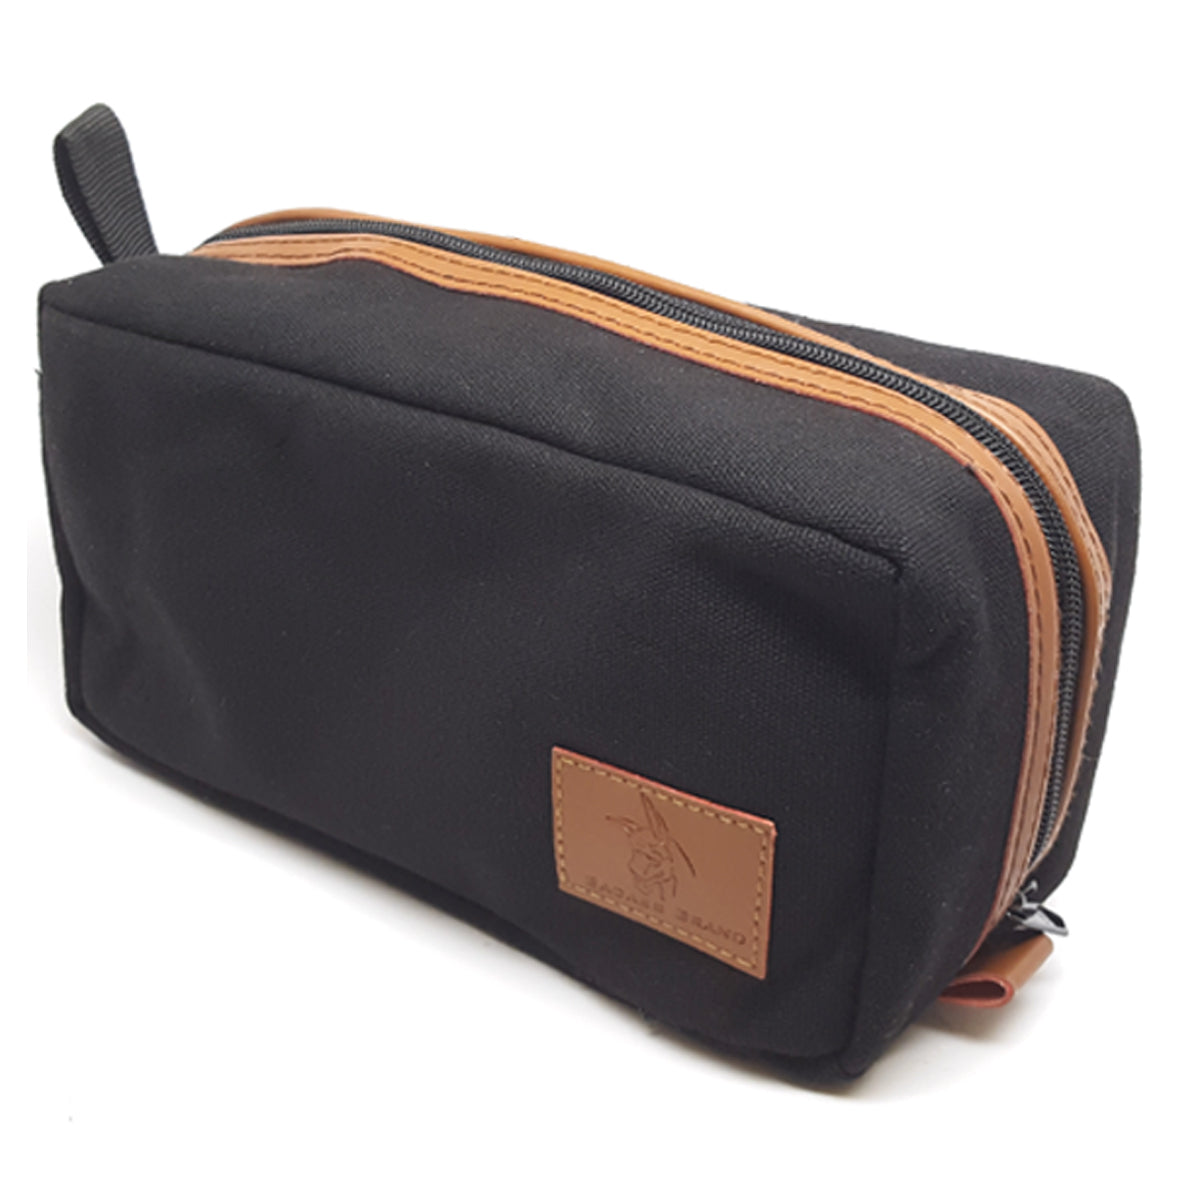 The Loaded Badass Canvas Travel Bag